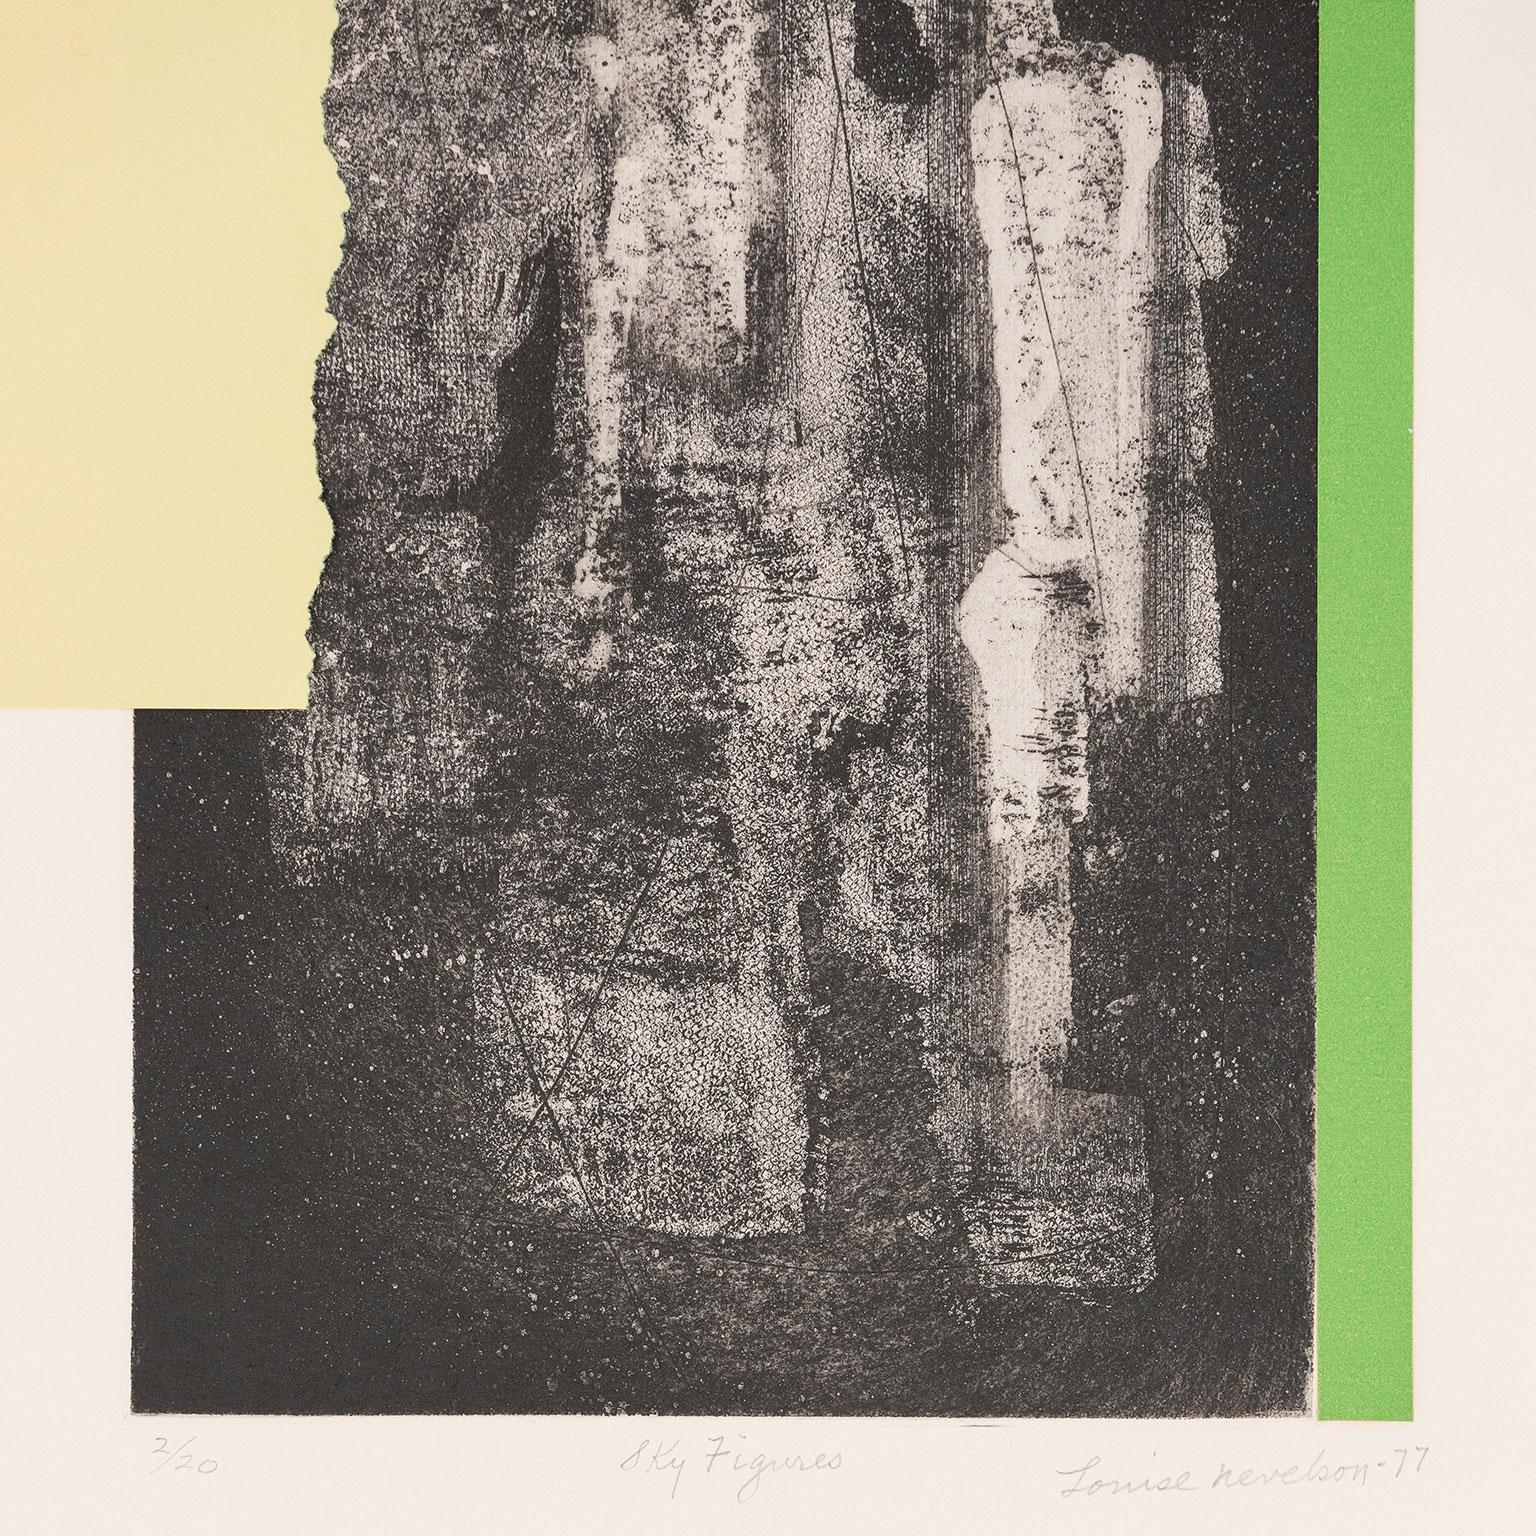 Sky Figures, Etching, aquatint, and collage, USA, 1977, Signed by artist For Sale 5